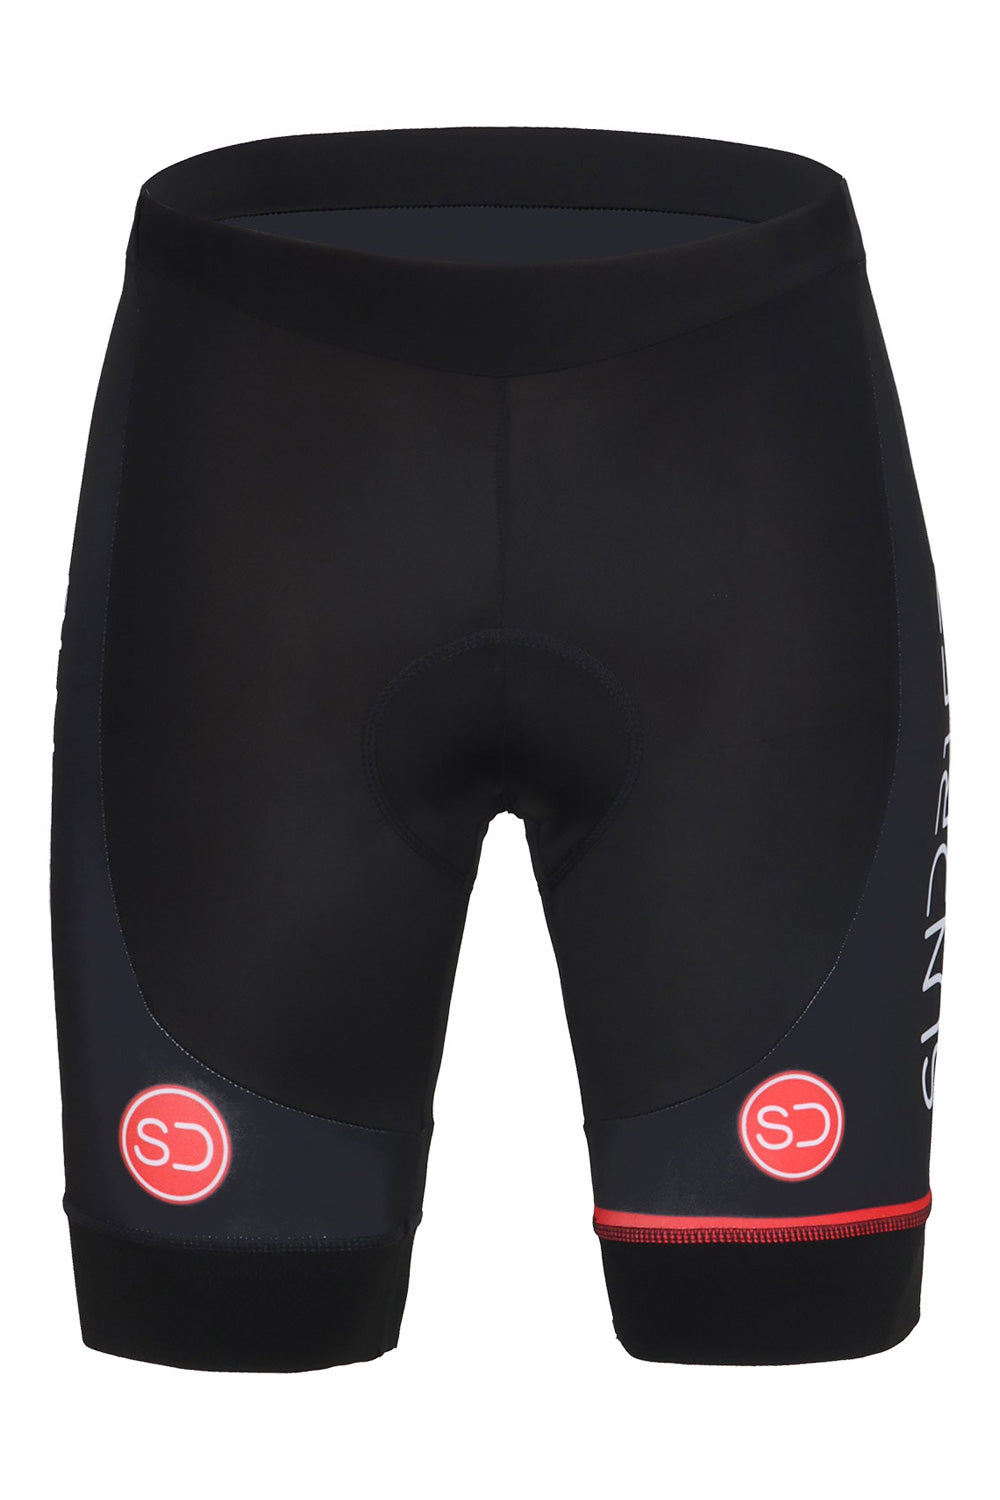 Sundried Rouleur Women's Padded Cycling Shorts